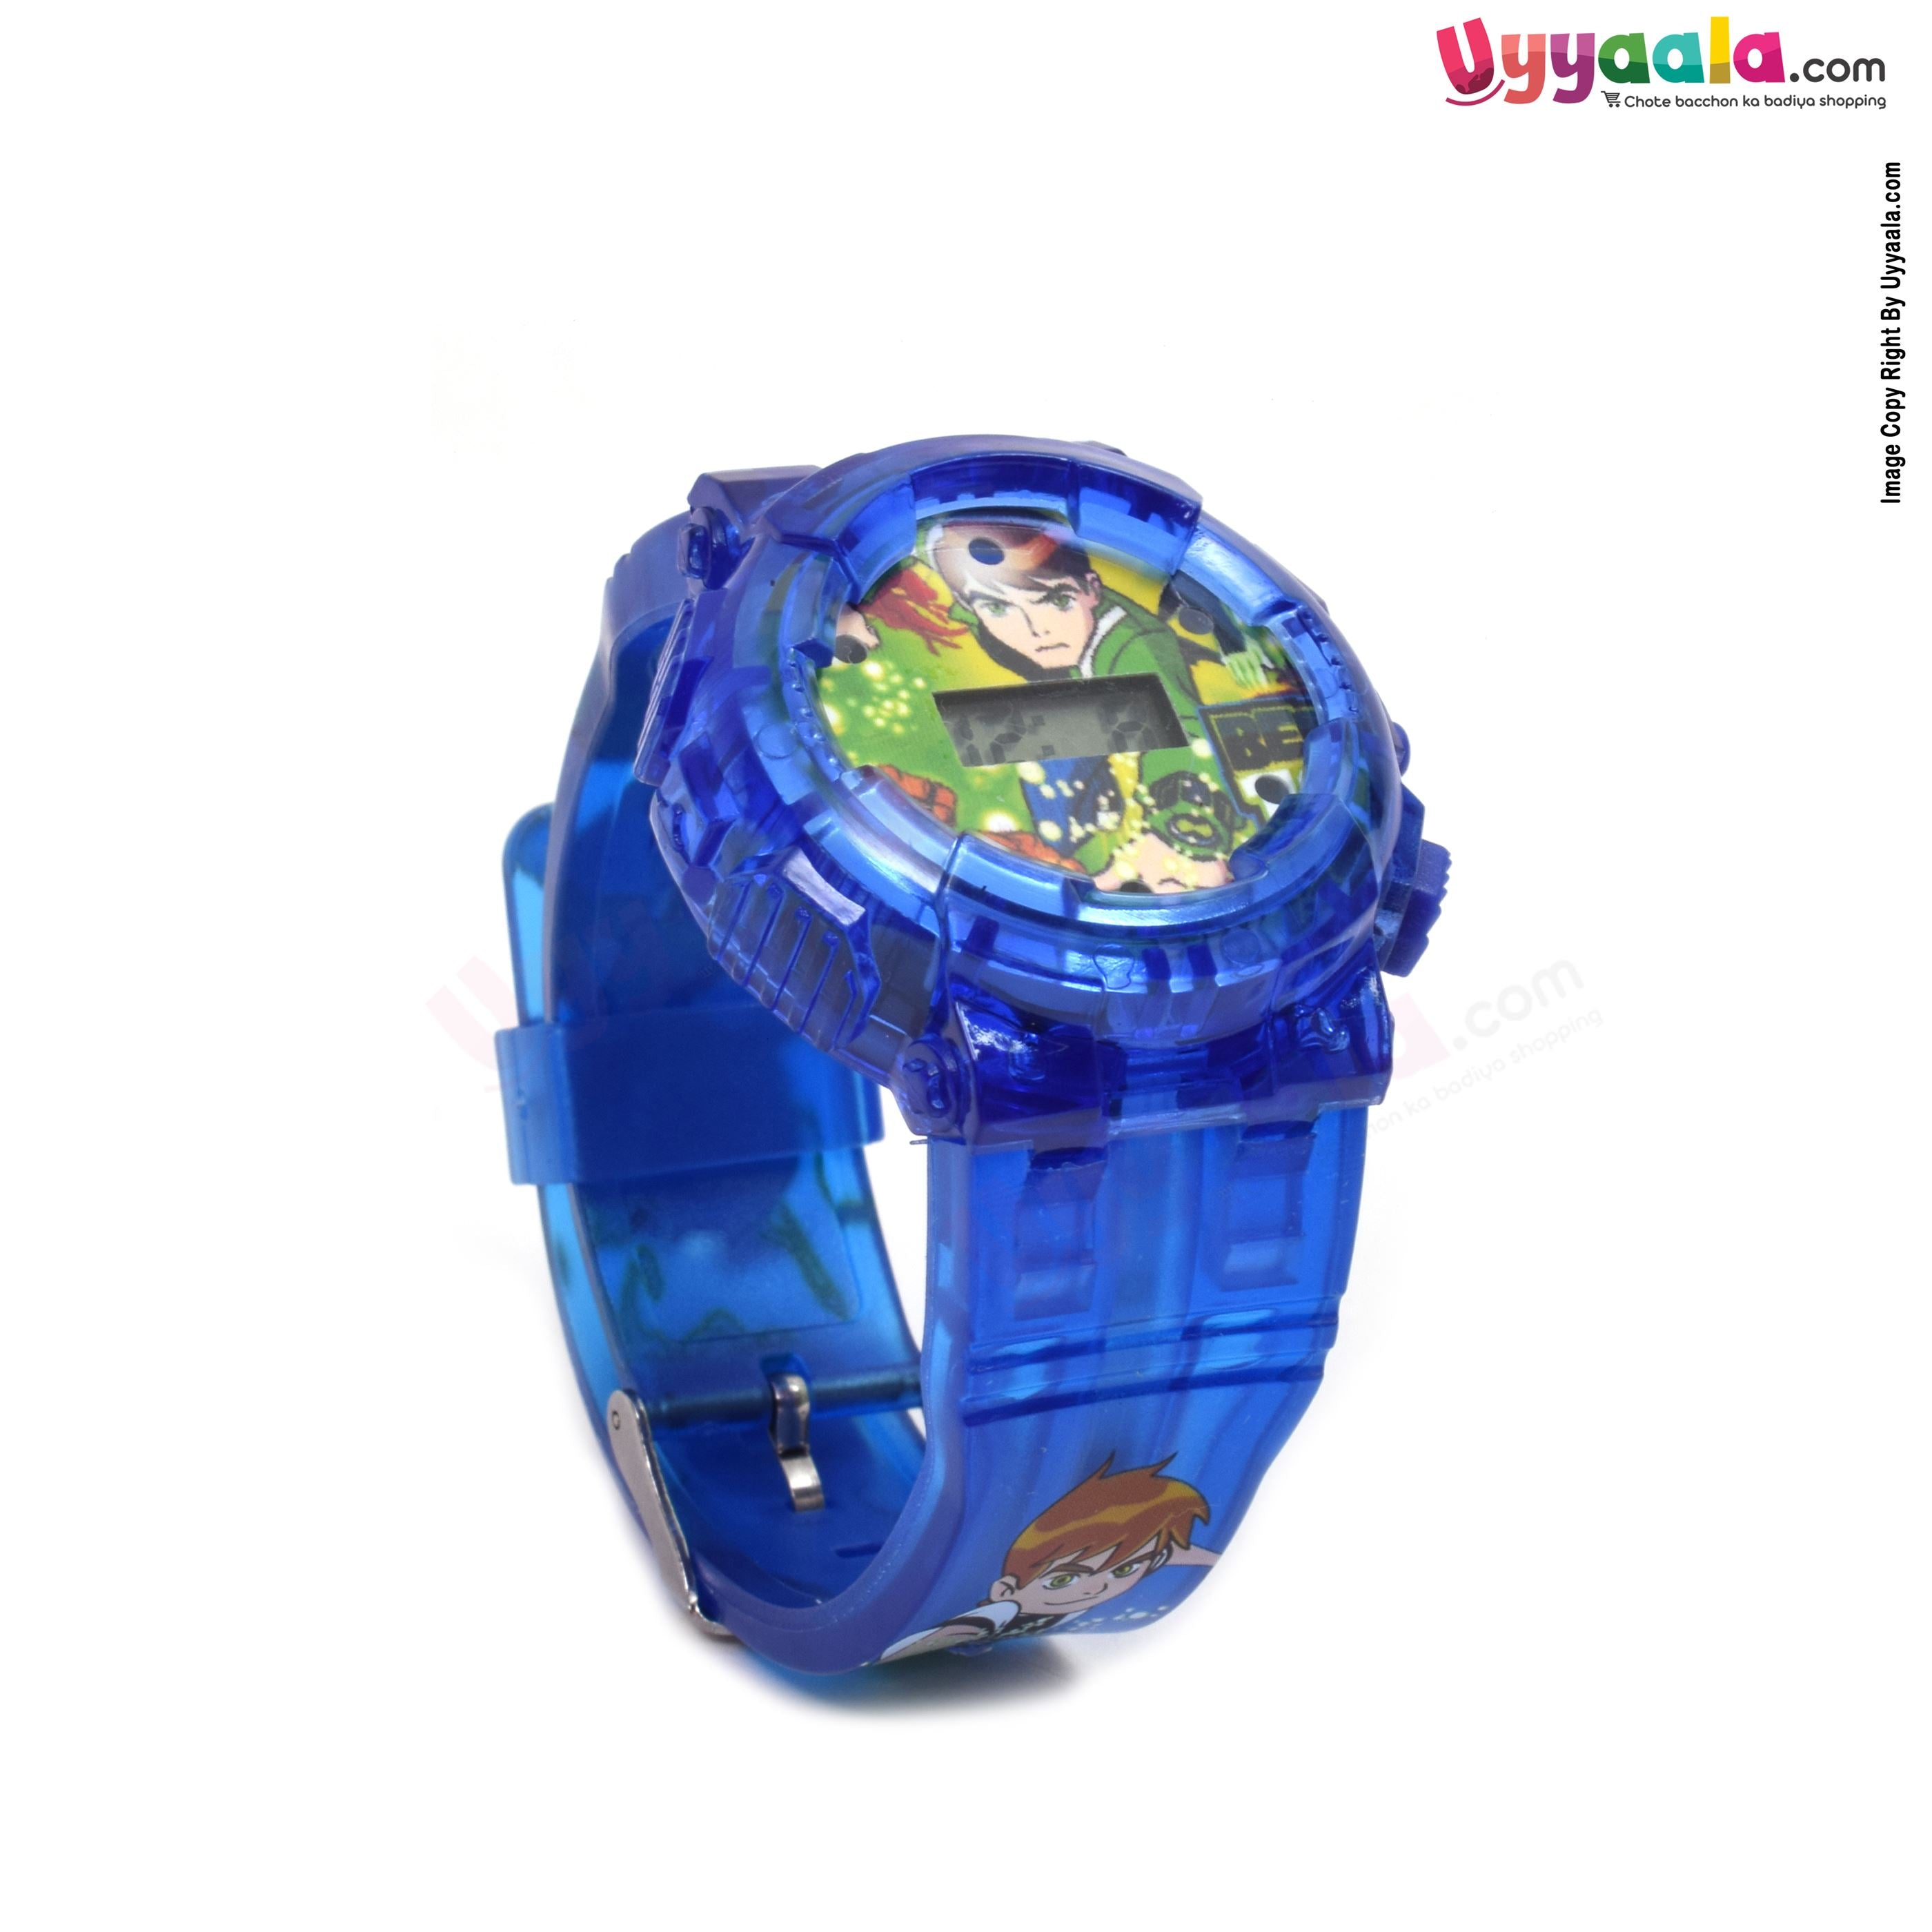 Ben-10 analog digital watch with led lights for kids - blue strap with ben-10 print